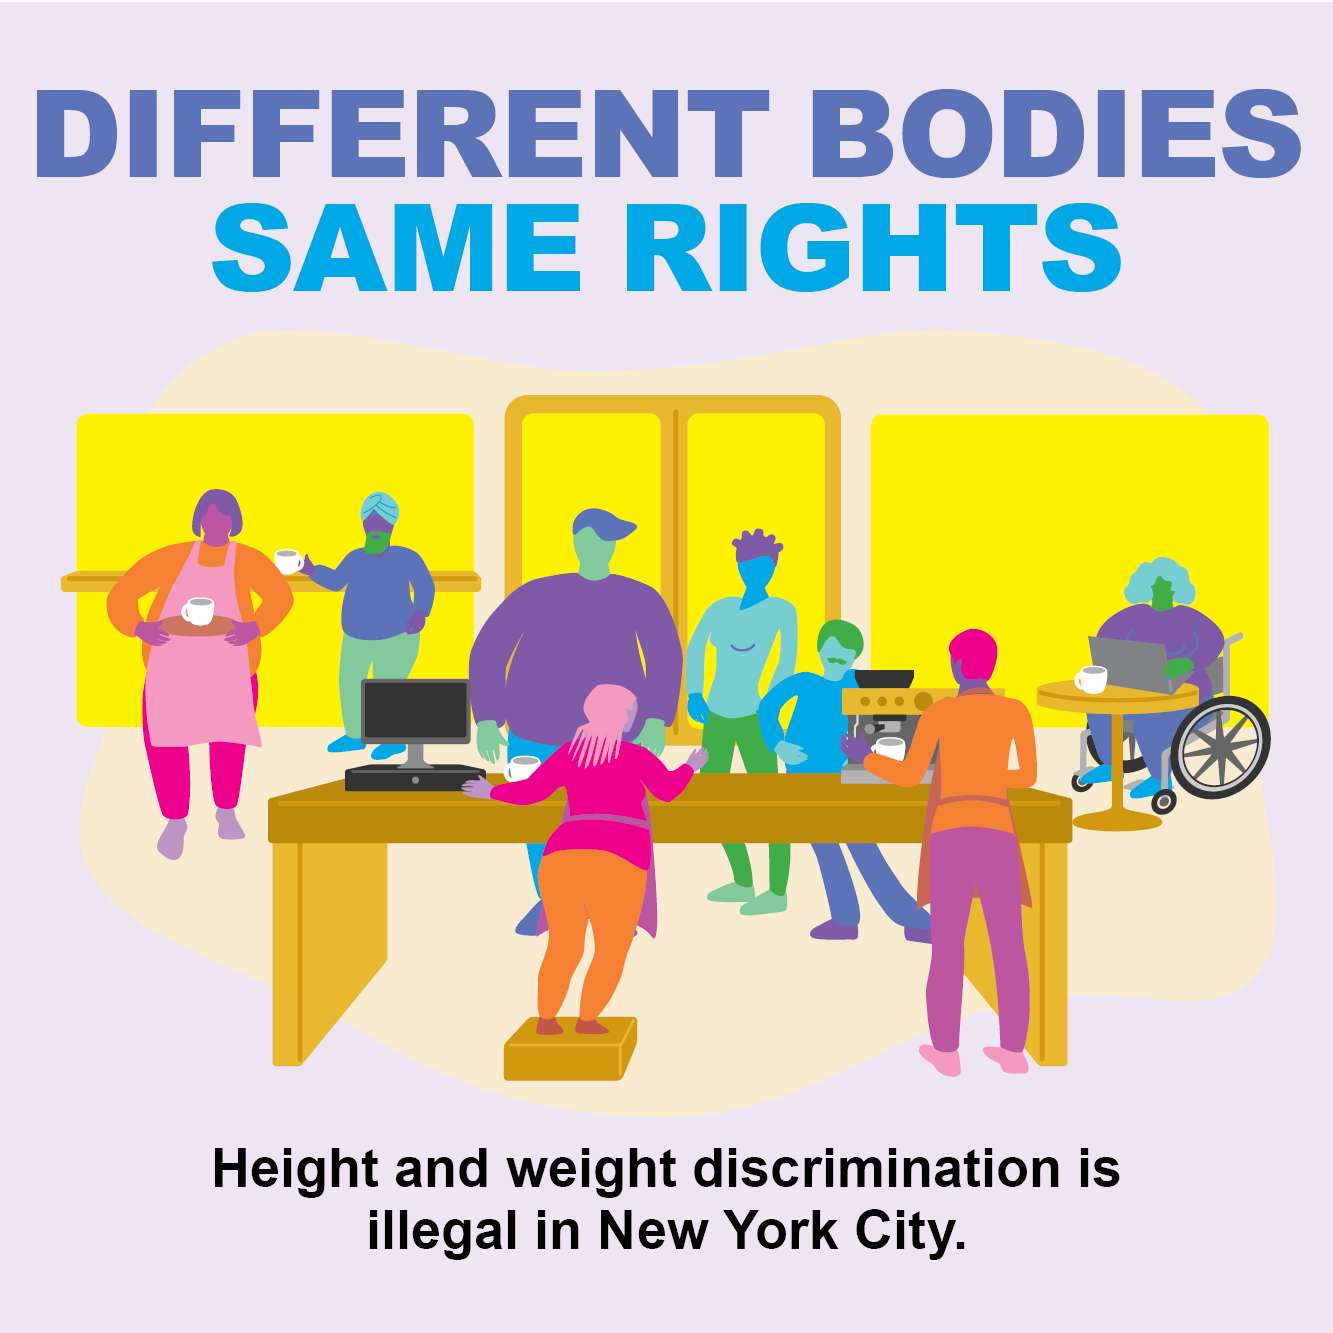 Different Bodies Same Rights, Height and weight discrimination is illegal in New York City